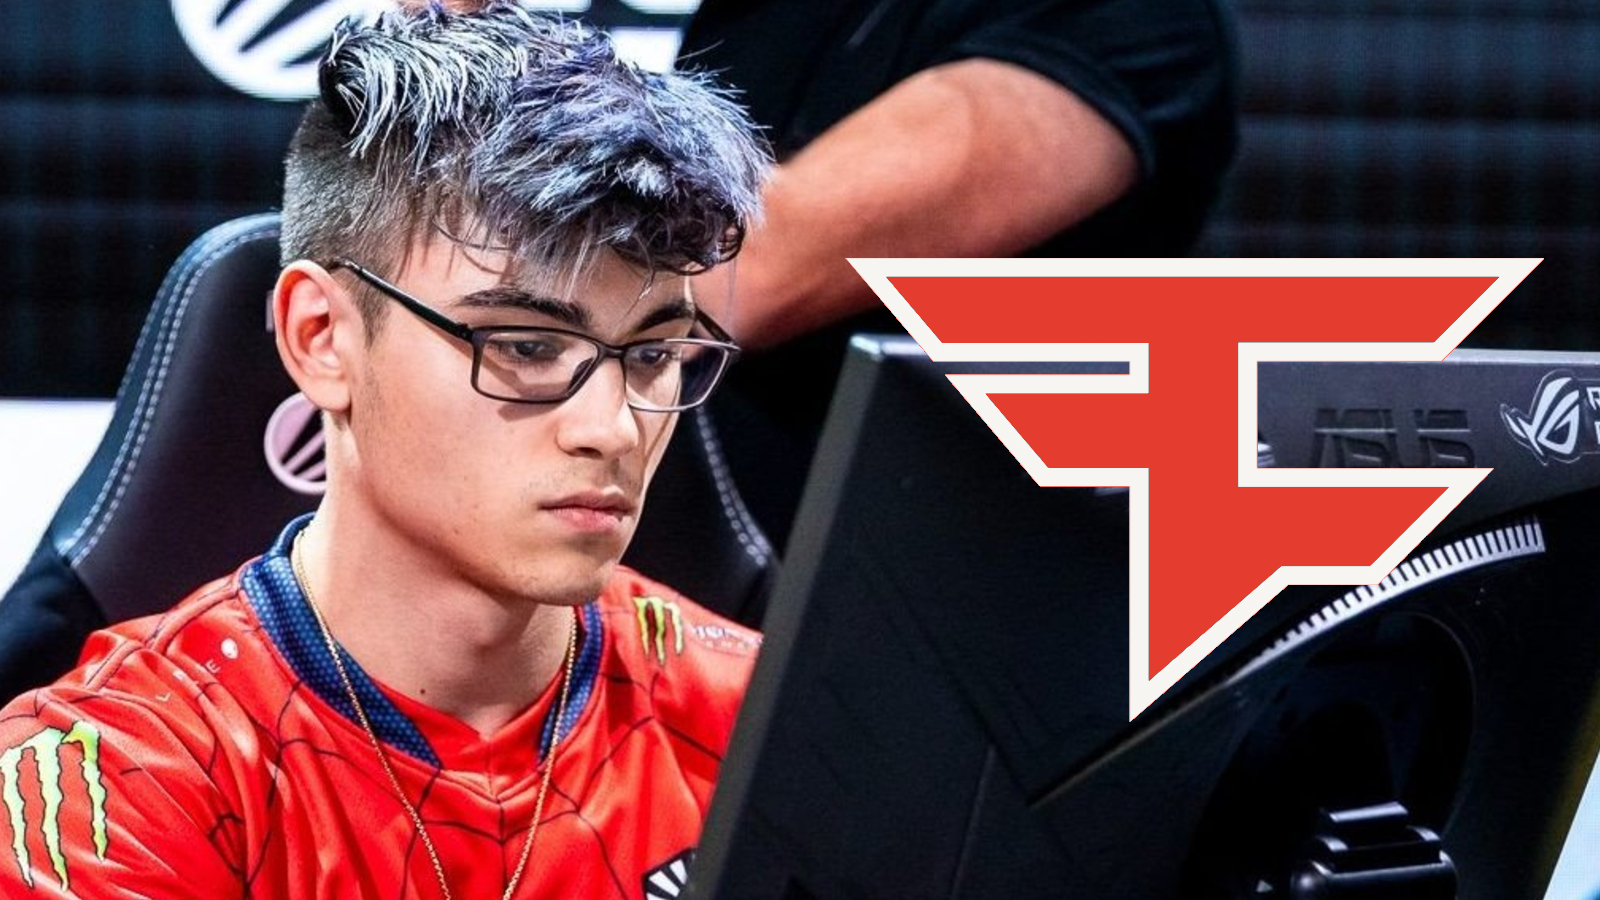 Twistzz departs FaZe Clan after historic year of competitive CS ...